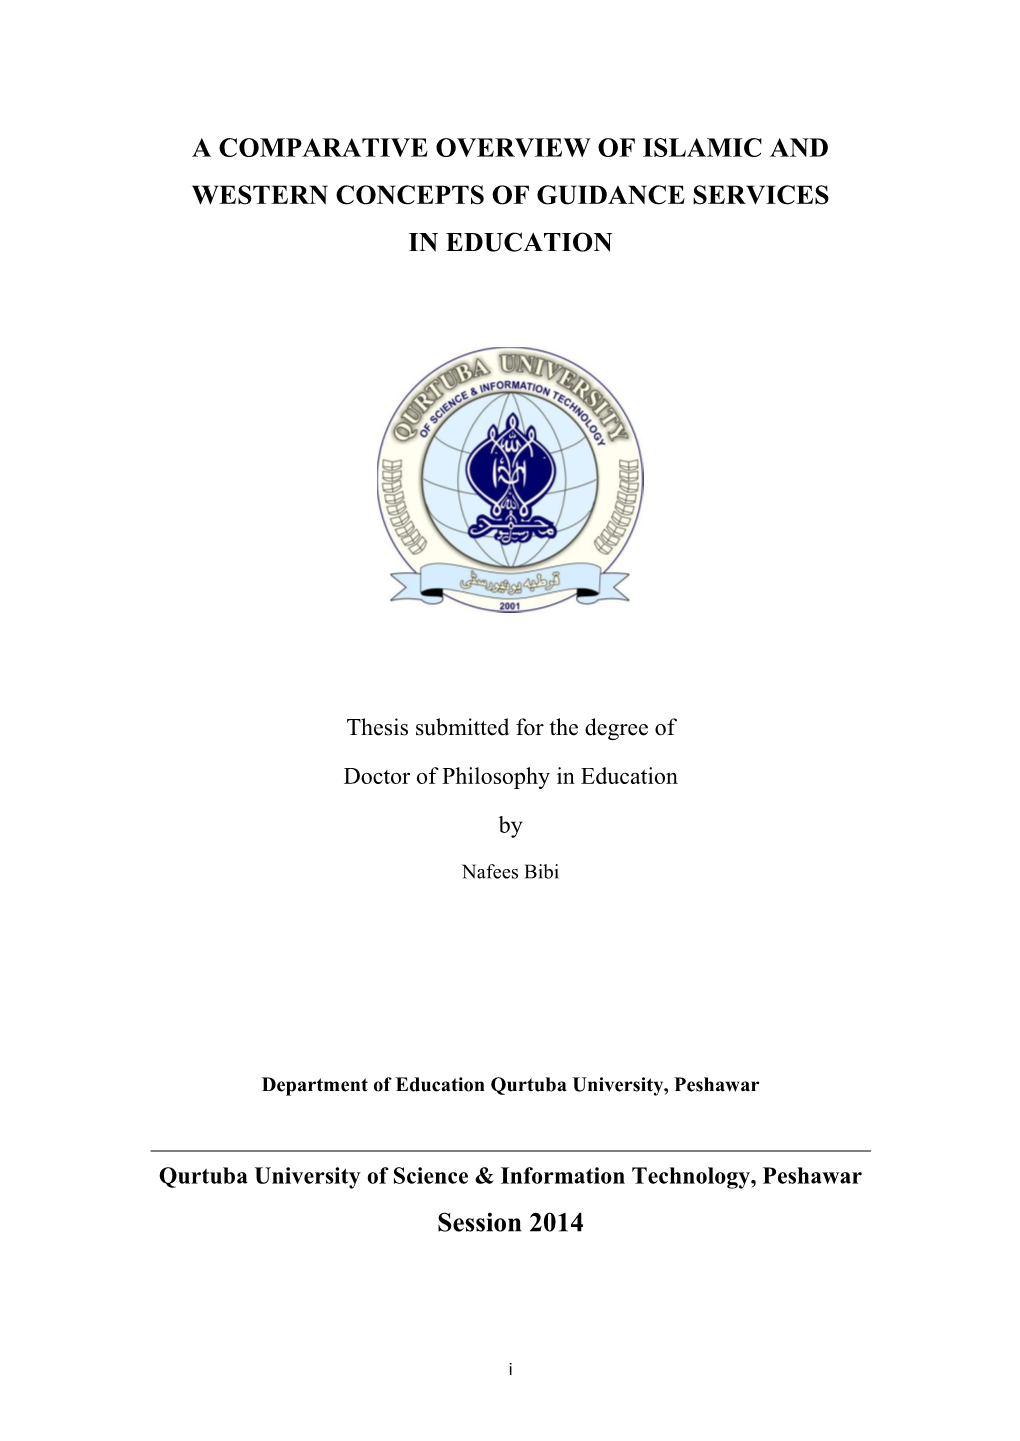 A Comparative Overview of Islamic and Western Concepts of Guidance Services in Education